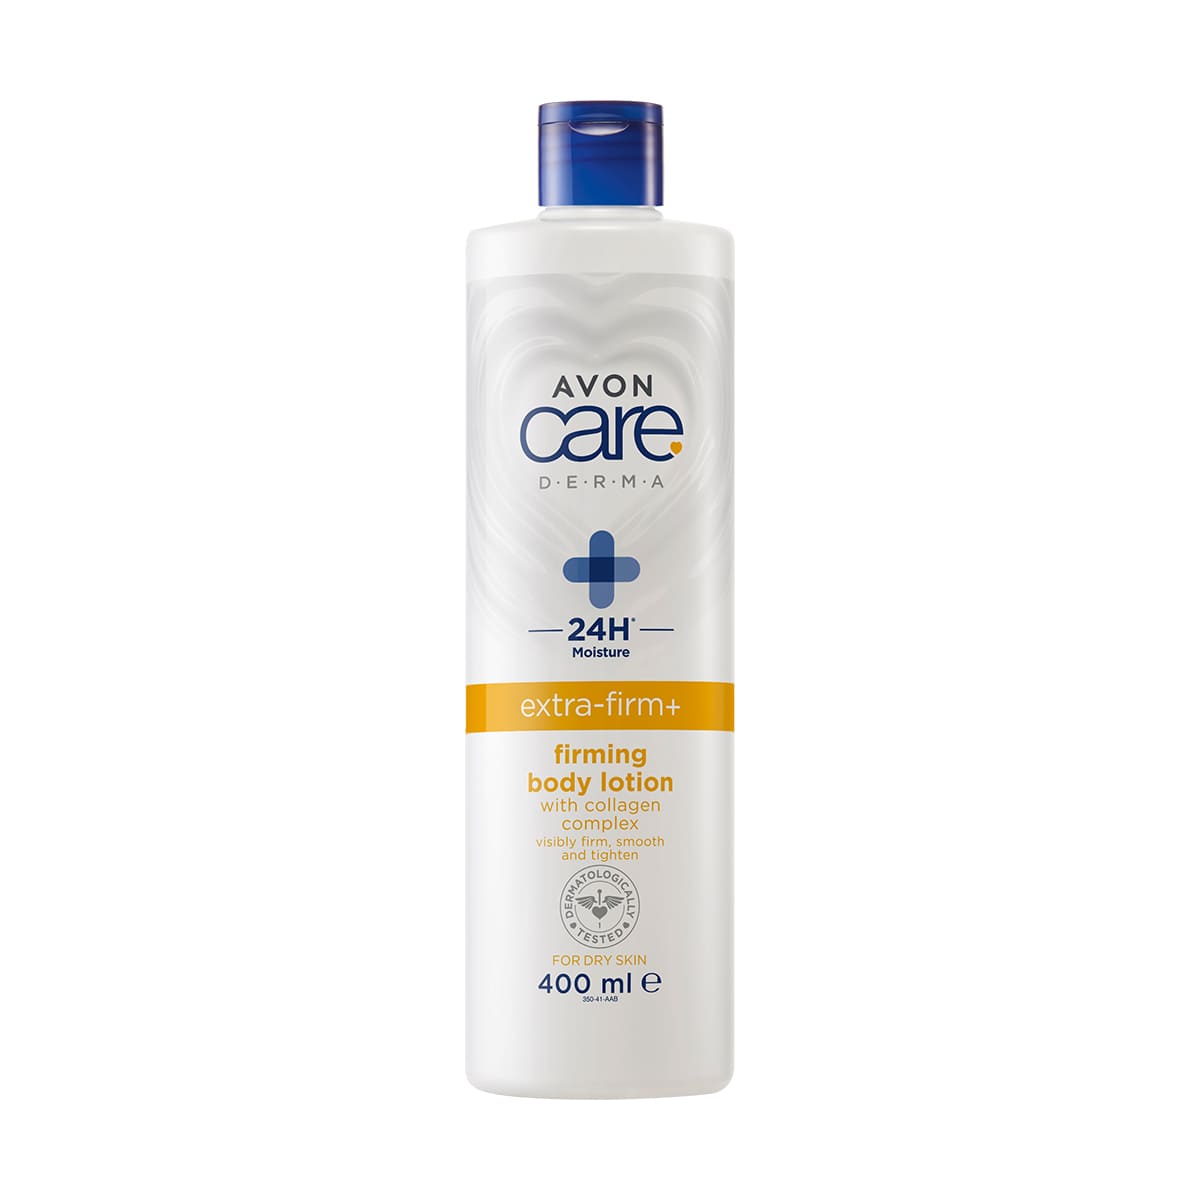 Avon Care Derma Extra Firm+ Body Lotion 400ml